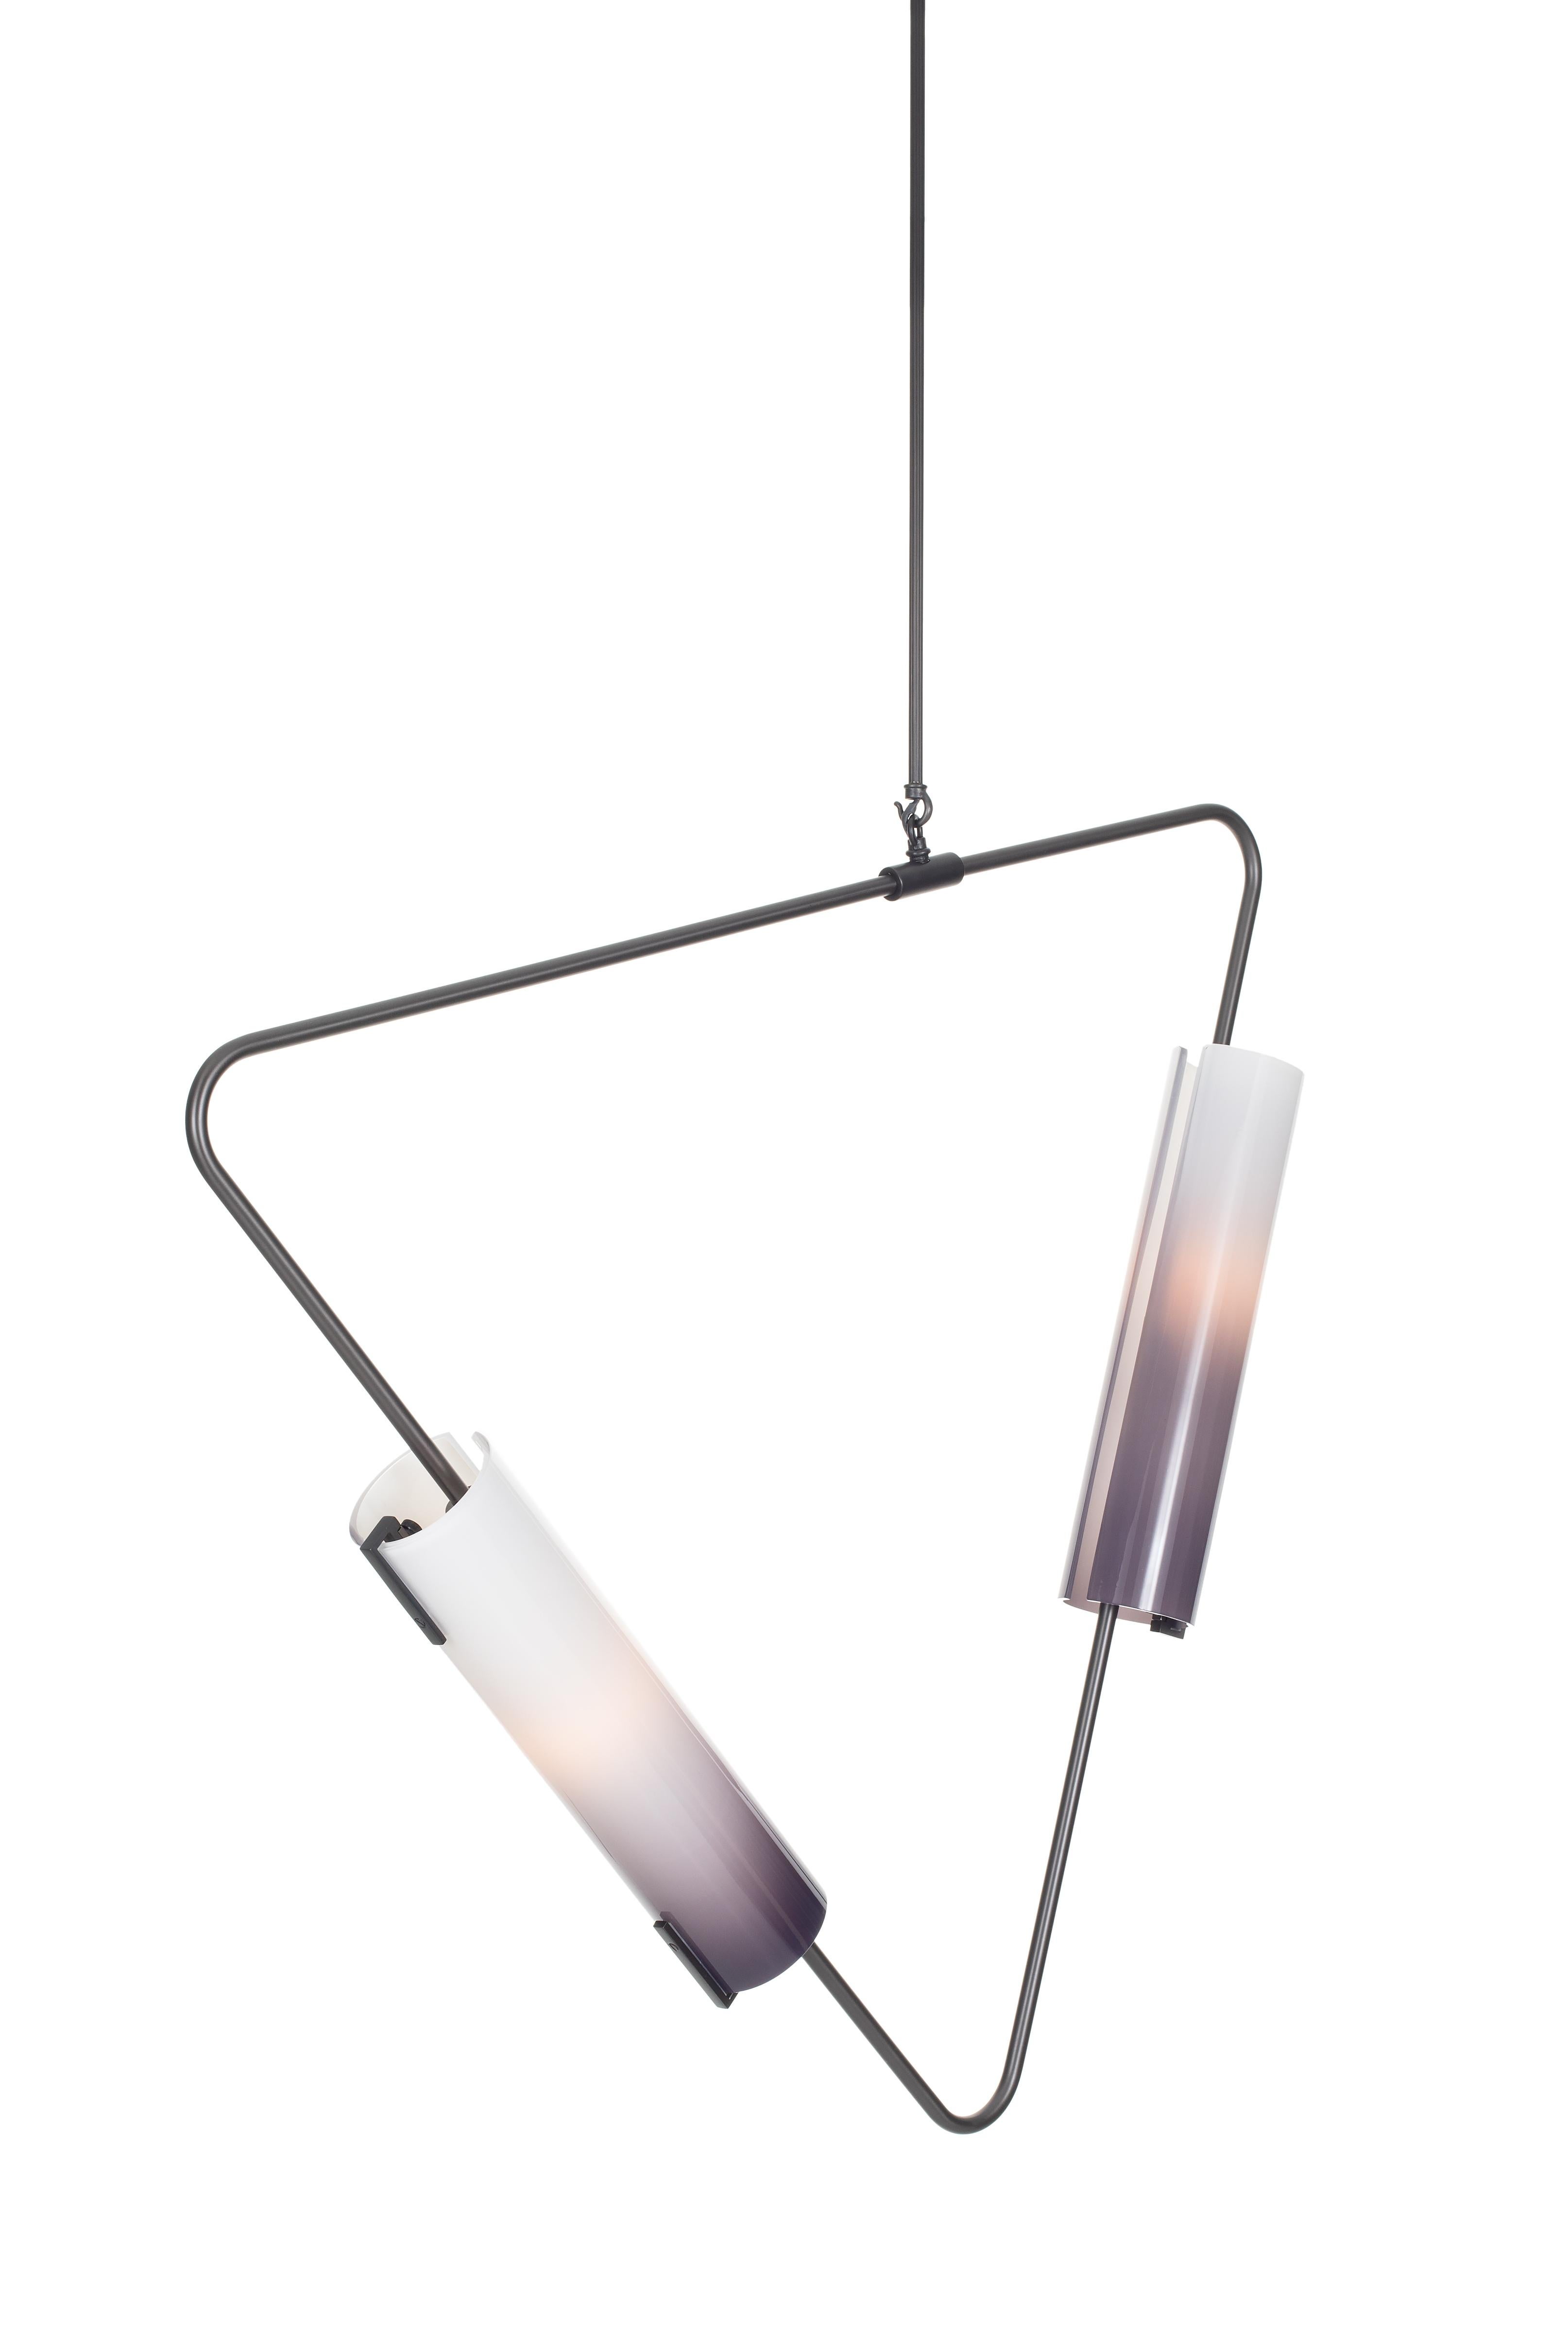 The Muse collection is comprised of triangular bent brass tube hardware with hand blown glass shades. Elements can be suspended in both horizontal and vertical orientations, combined into chandeliers or used individually. 

Avram Rusu Studio is a